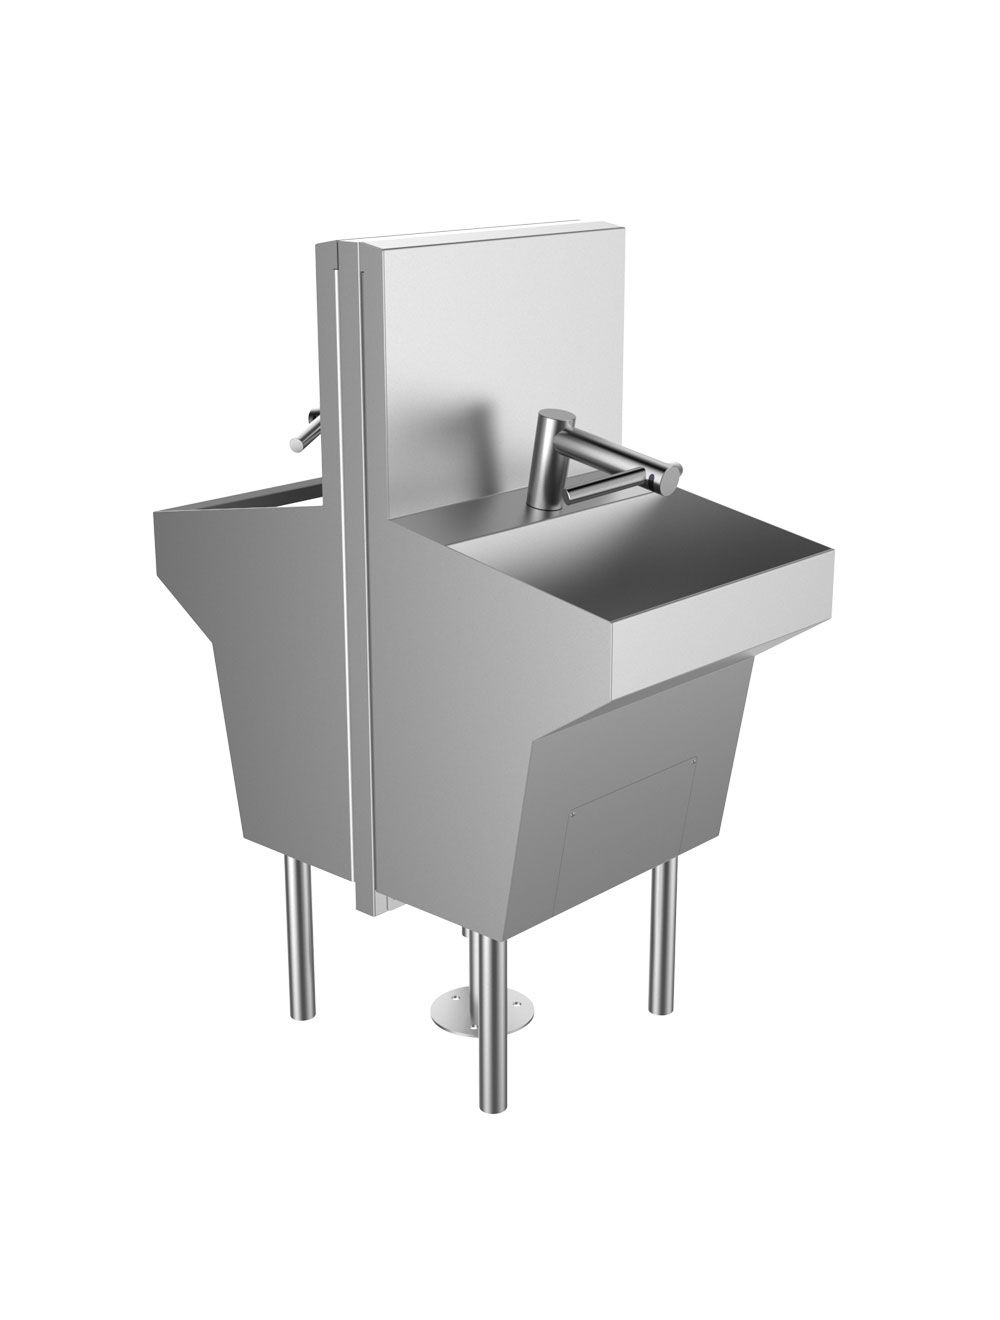 Basin Mounted Trough Steel Sink Island Featuring Dyson Airblade Wash+Dry Hand Dryer SYSPAL |